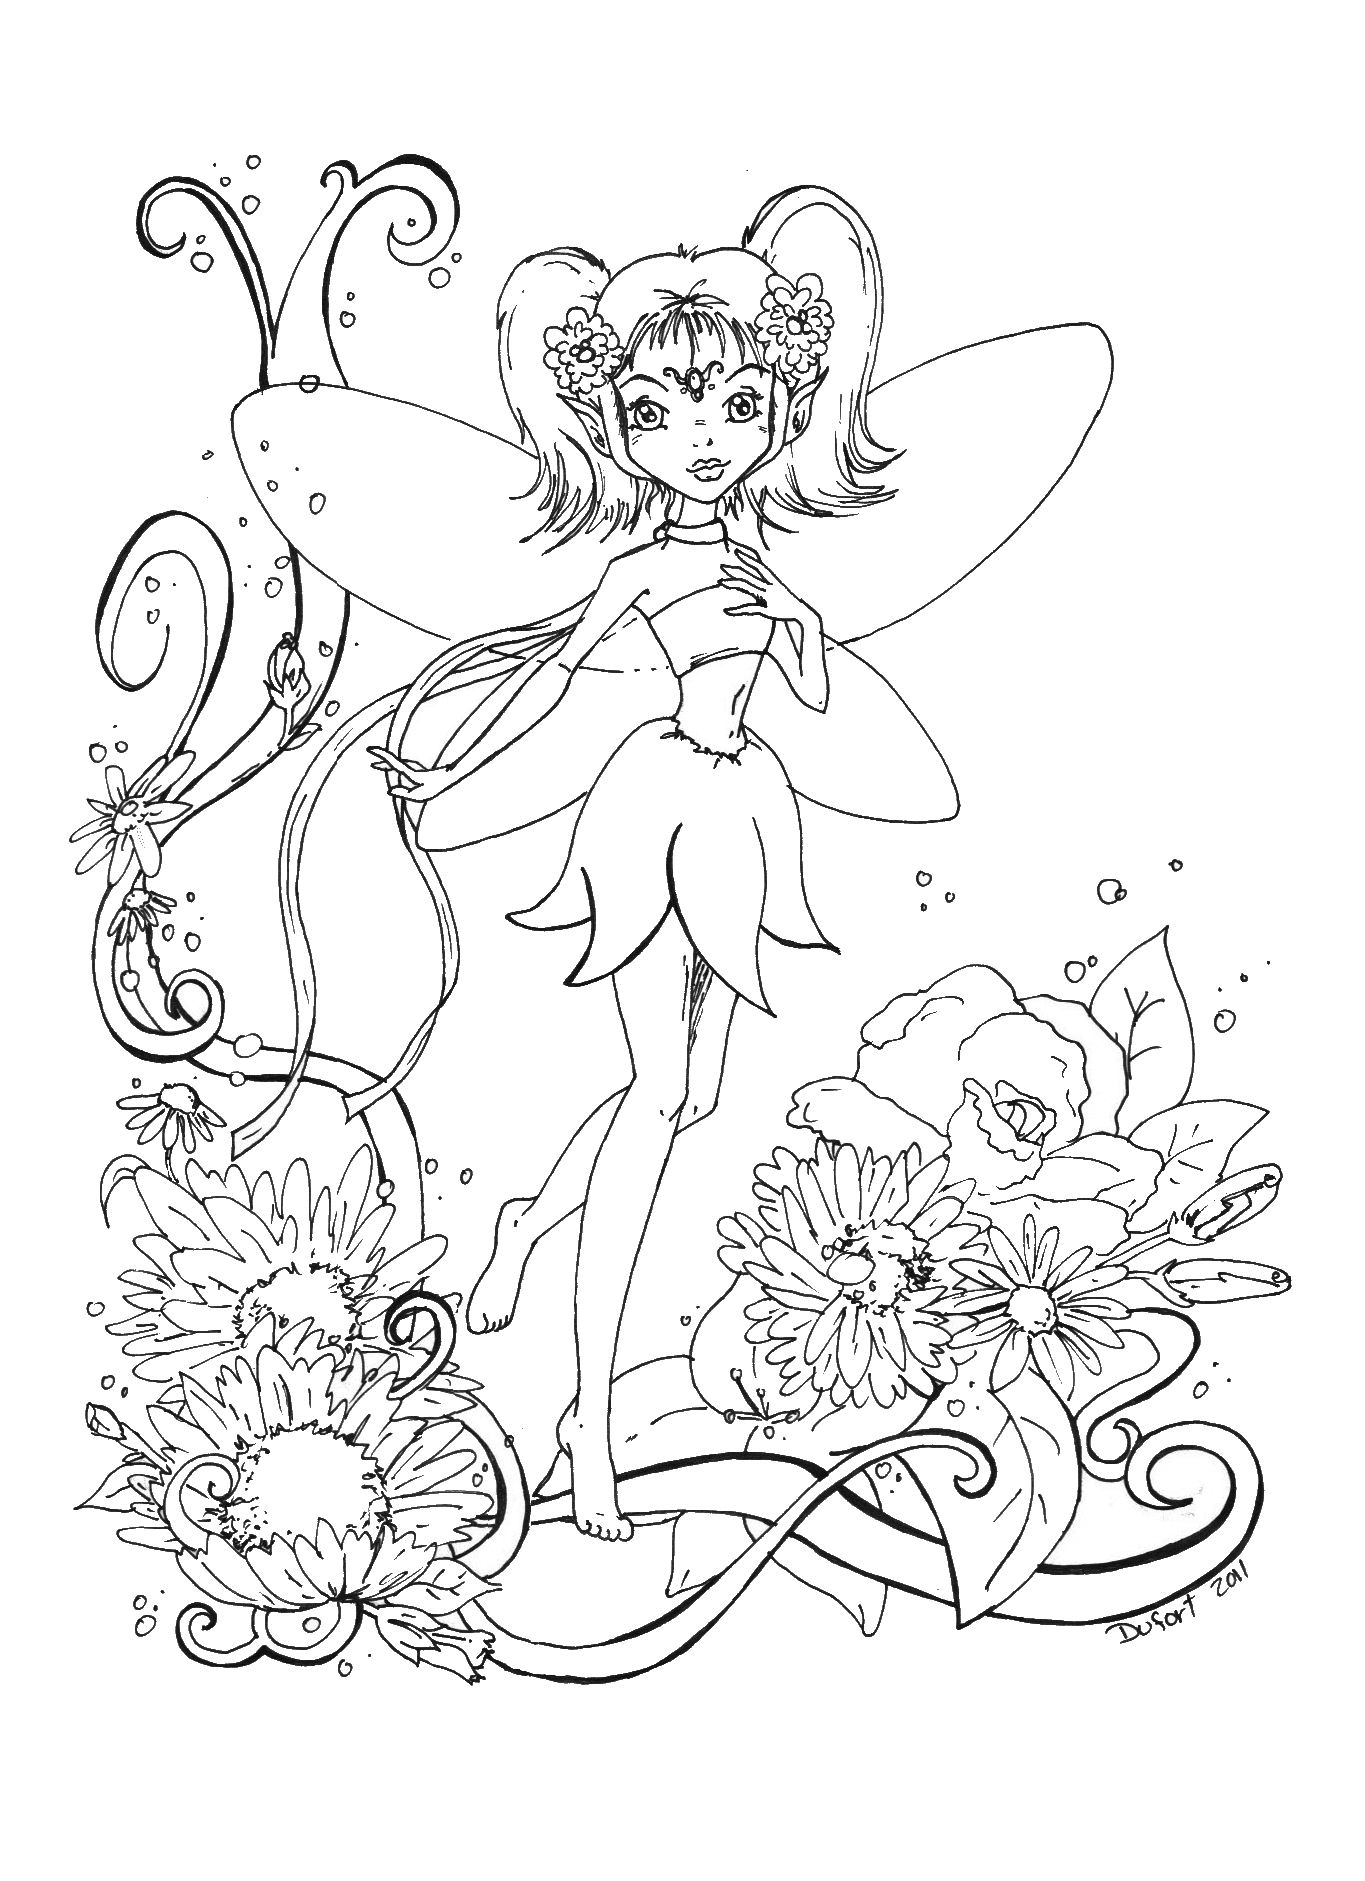 free-printable-coloring-pages-for-adults-dark-fairies-at-getdrawings